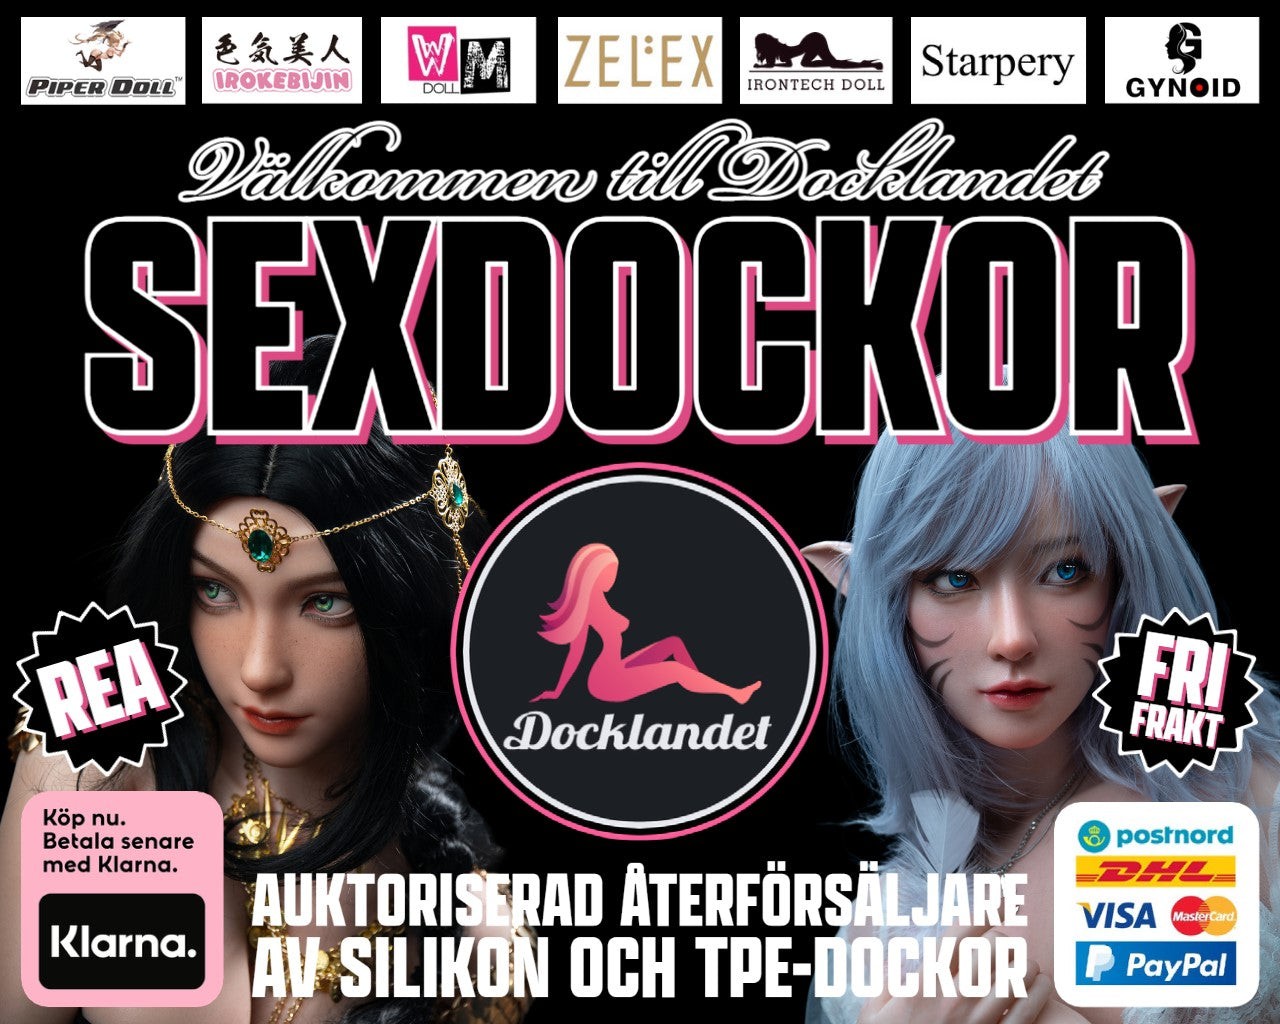 Sex dolls and real doll Made of TPE and silicone. Buy a sex doll at Docklandet Today, always free shipping to Sweden and the entire Nordic region. We have over 400 sex dolls, thumbnails, full-size real doll, male sex dolls, curvy sex dolls, WM-Doll, Zelex.